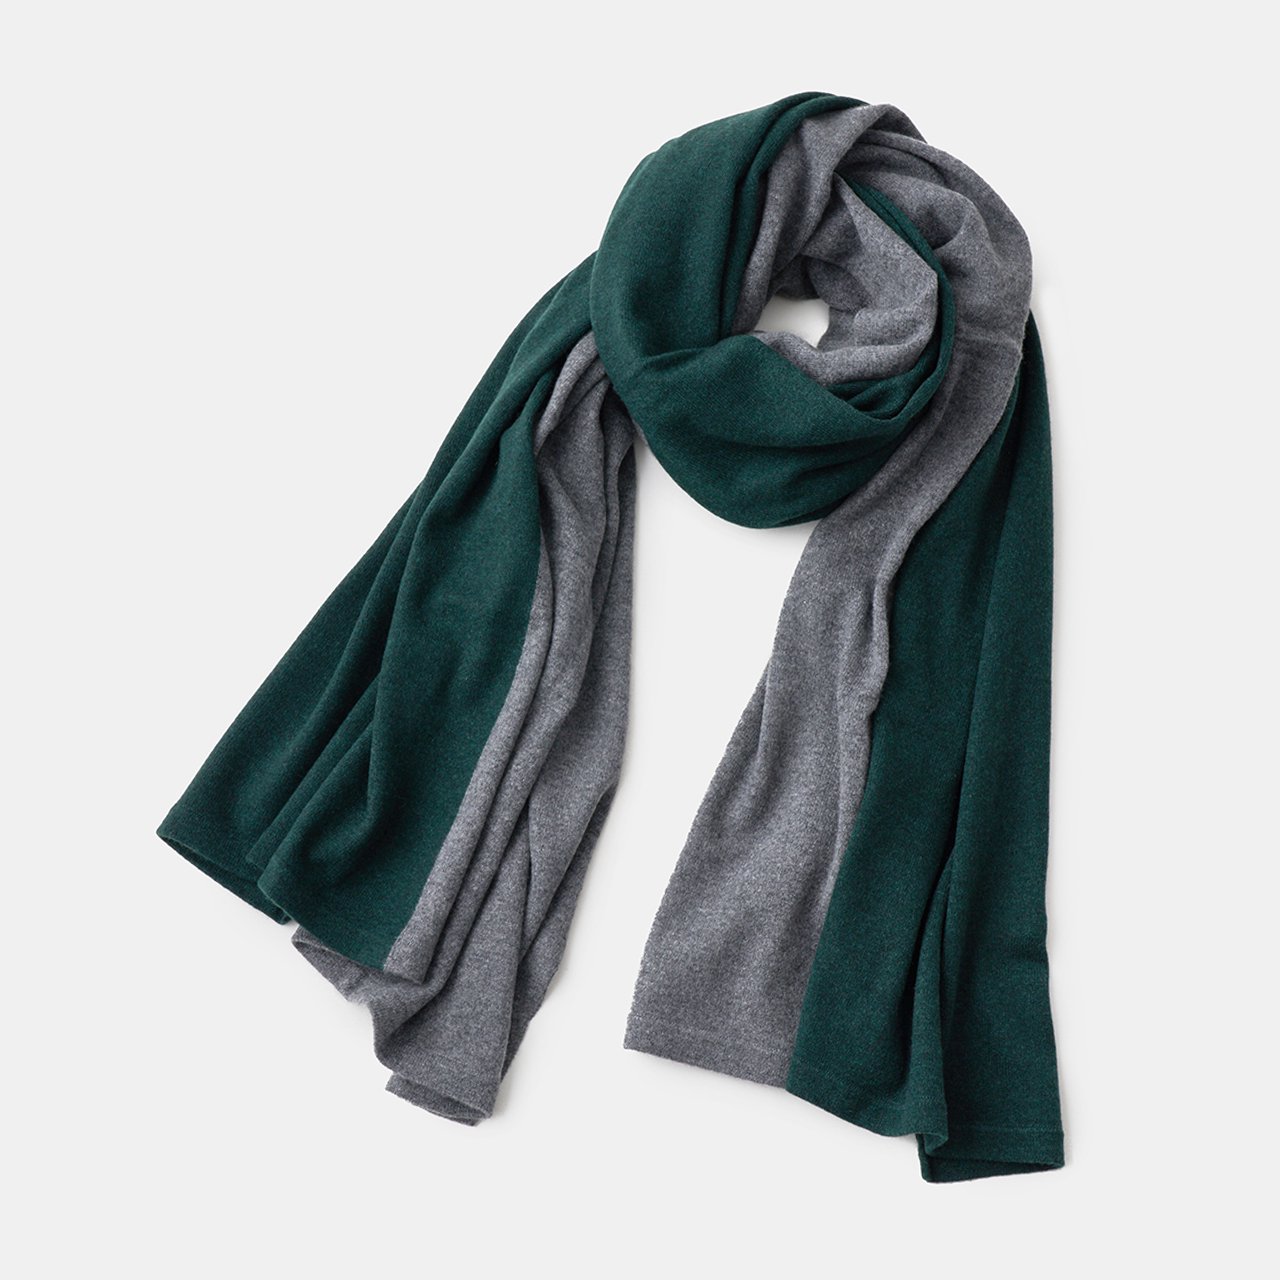 CASHMERE BICOLOR STOLE<BR>CHARCOAL GREY  FOREST GREEN